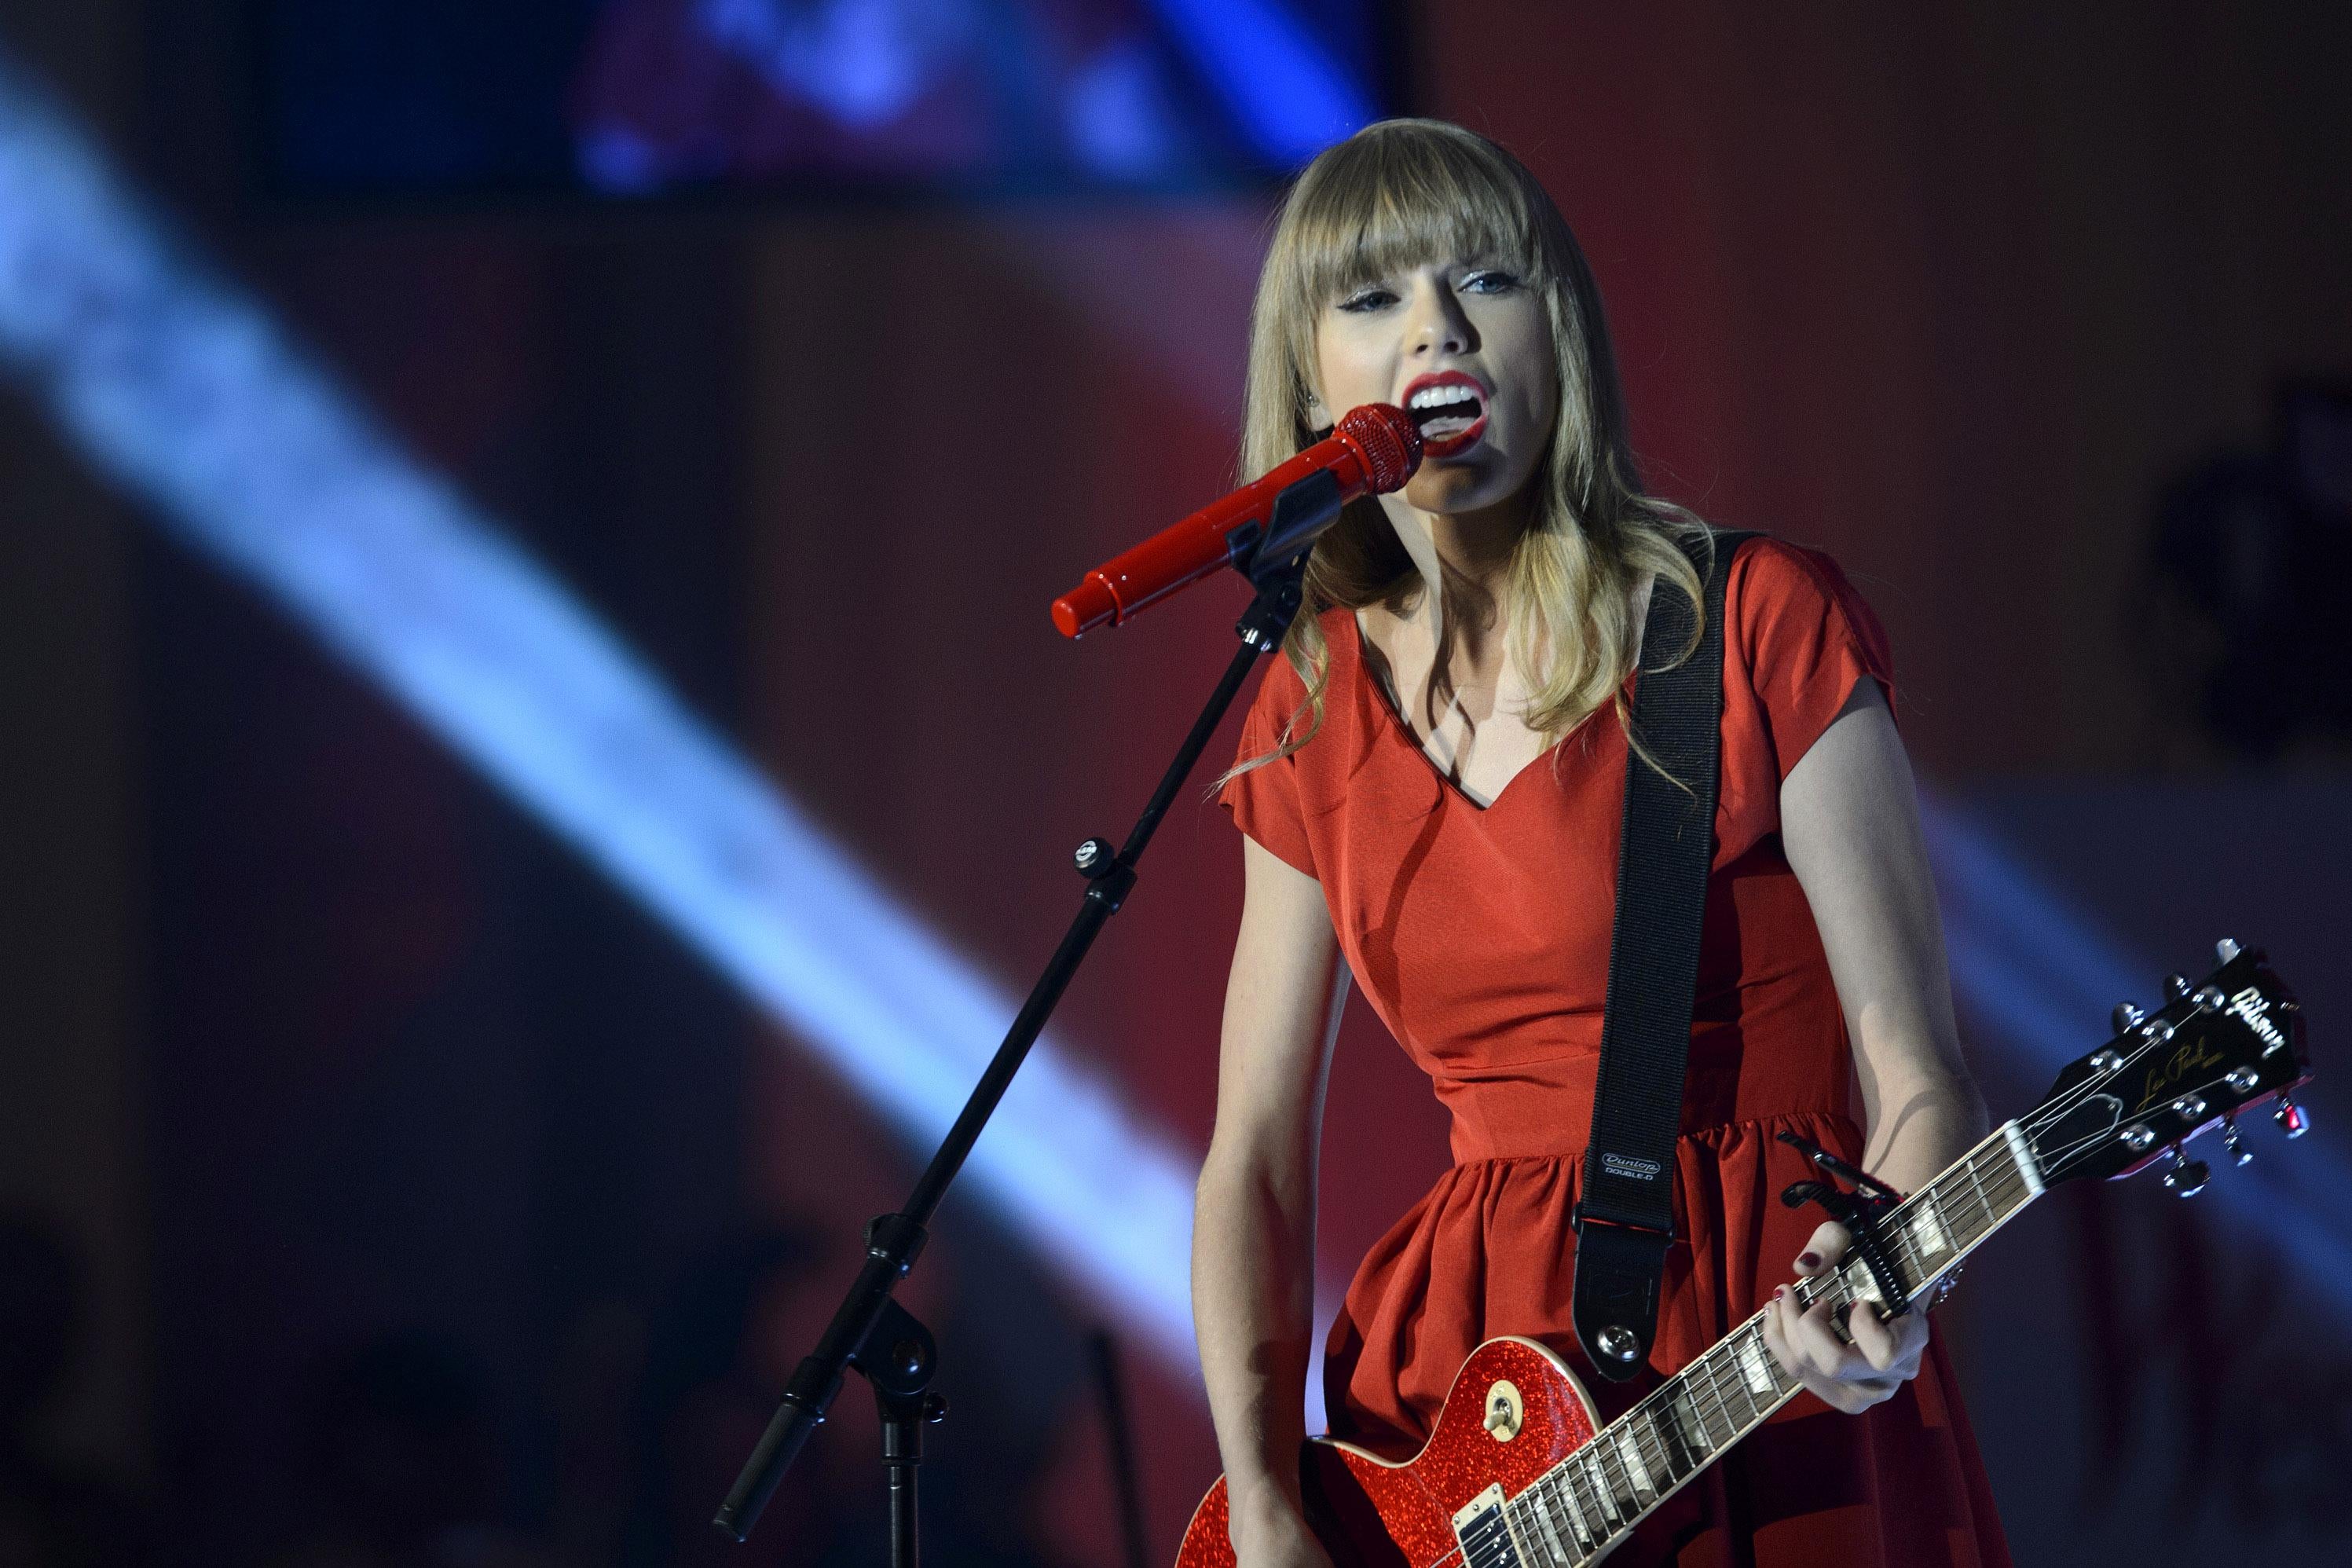 A blond plays a red guitar while wearing a red dress on stage. 